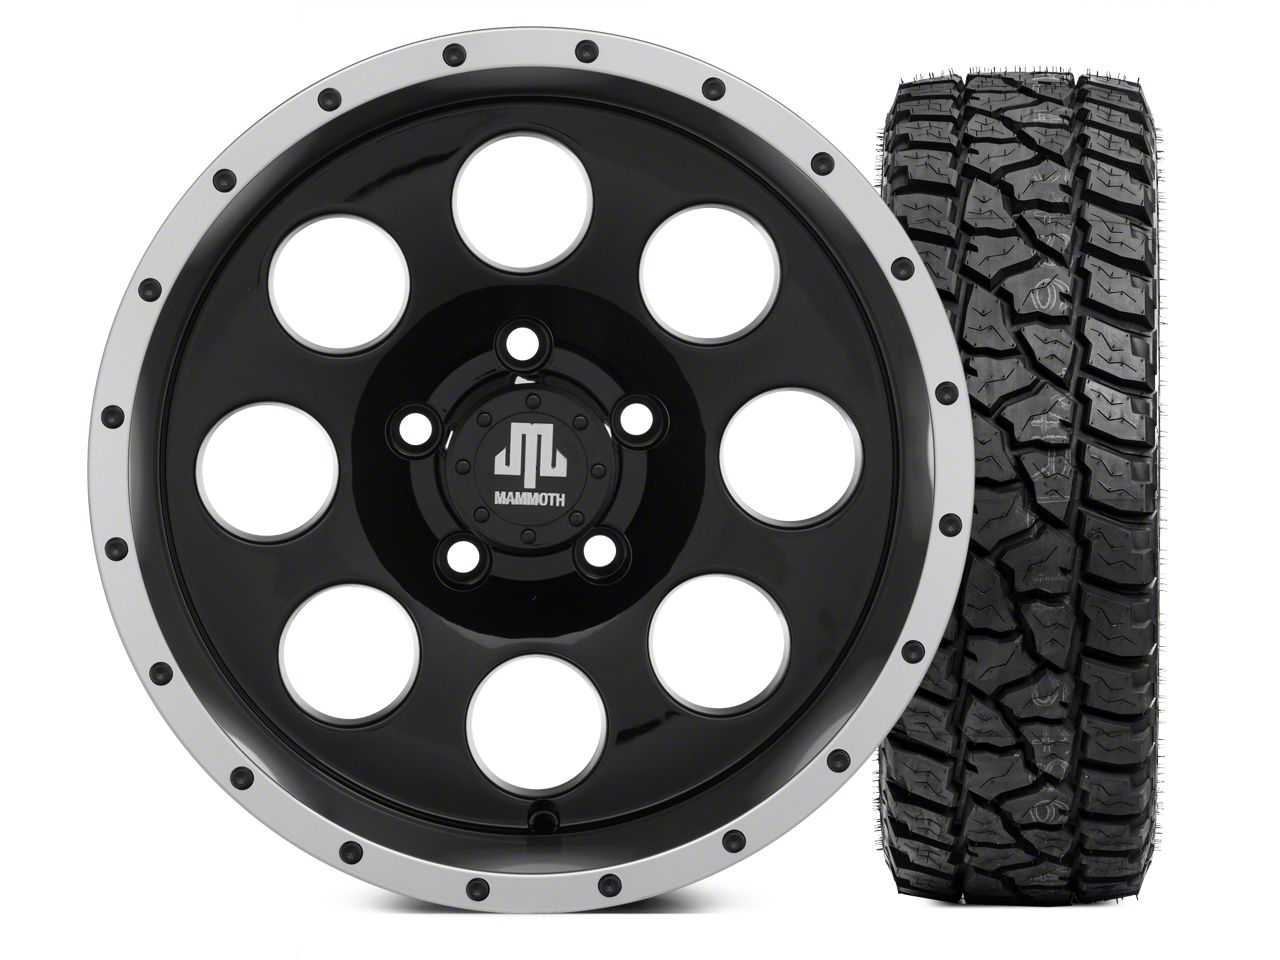 F150 Wheel & Tire Packages